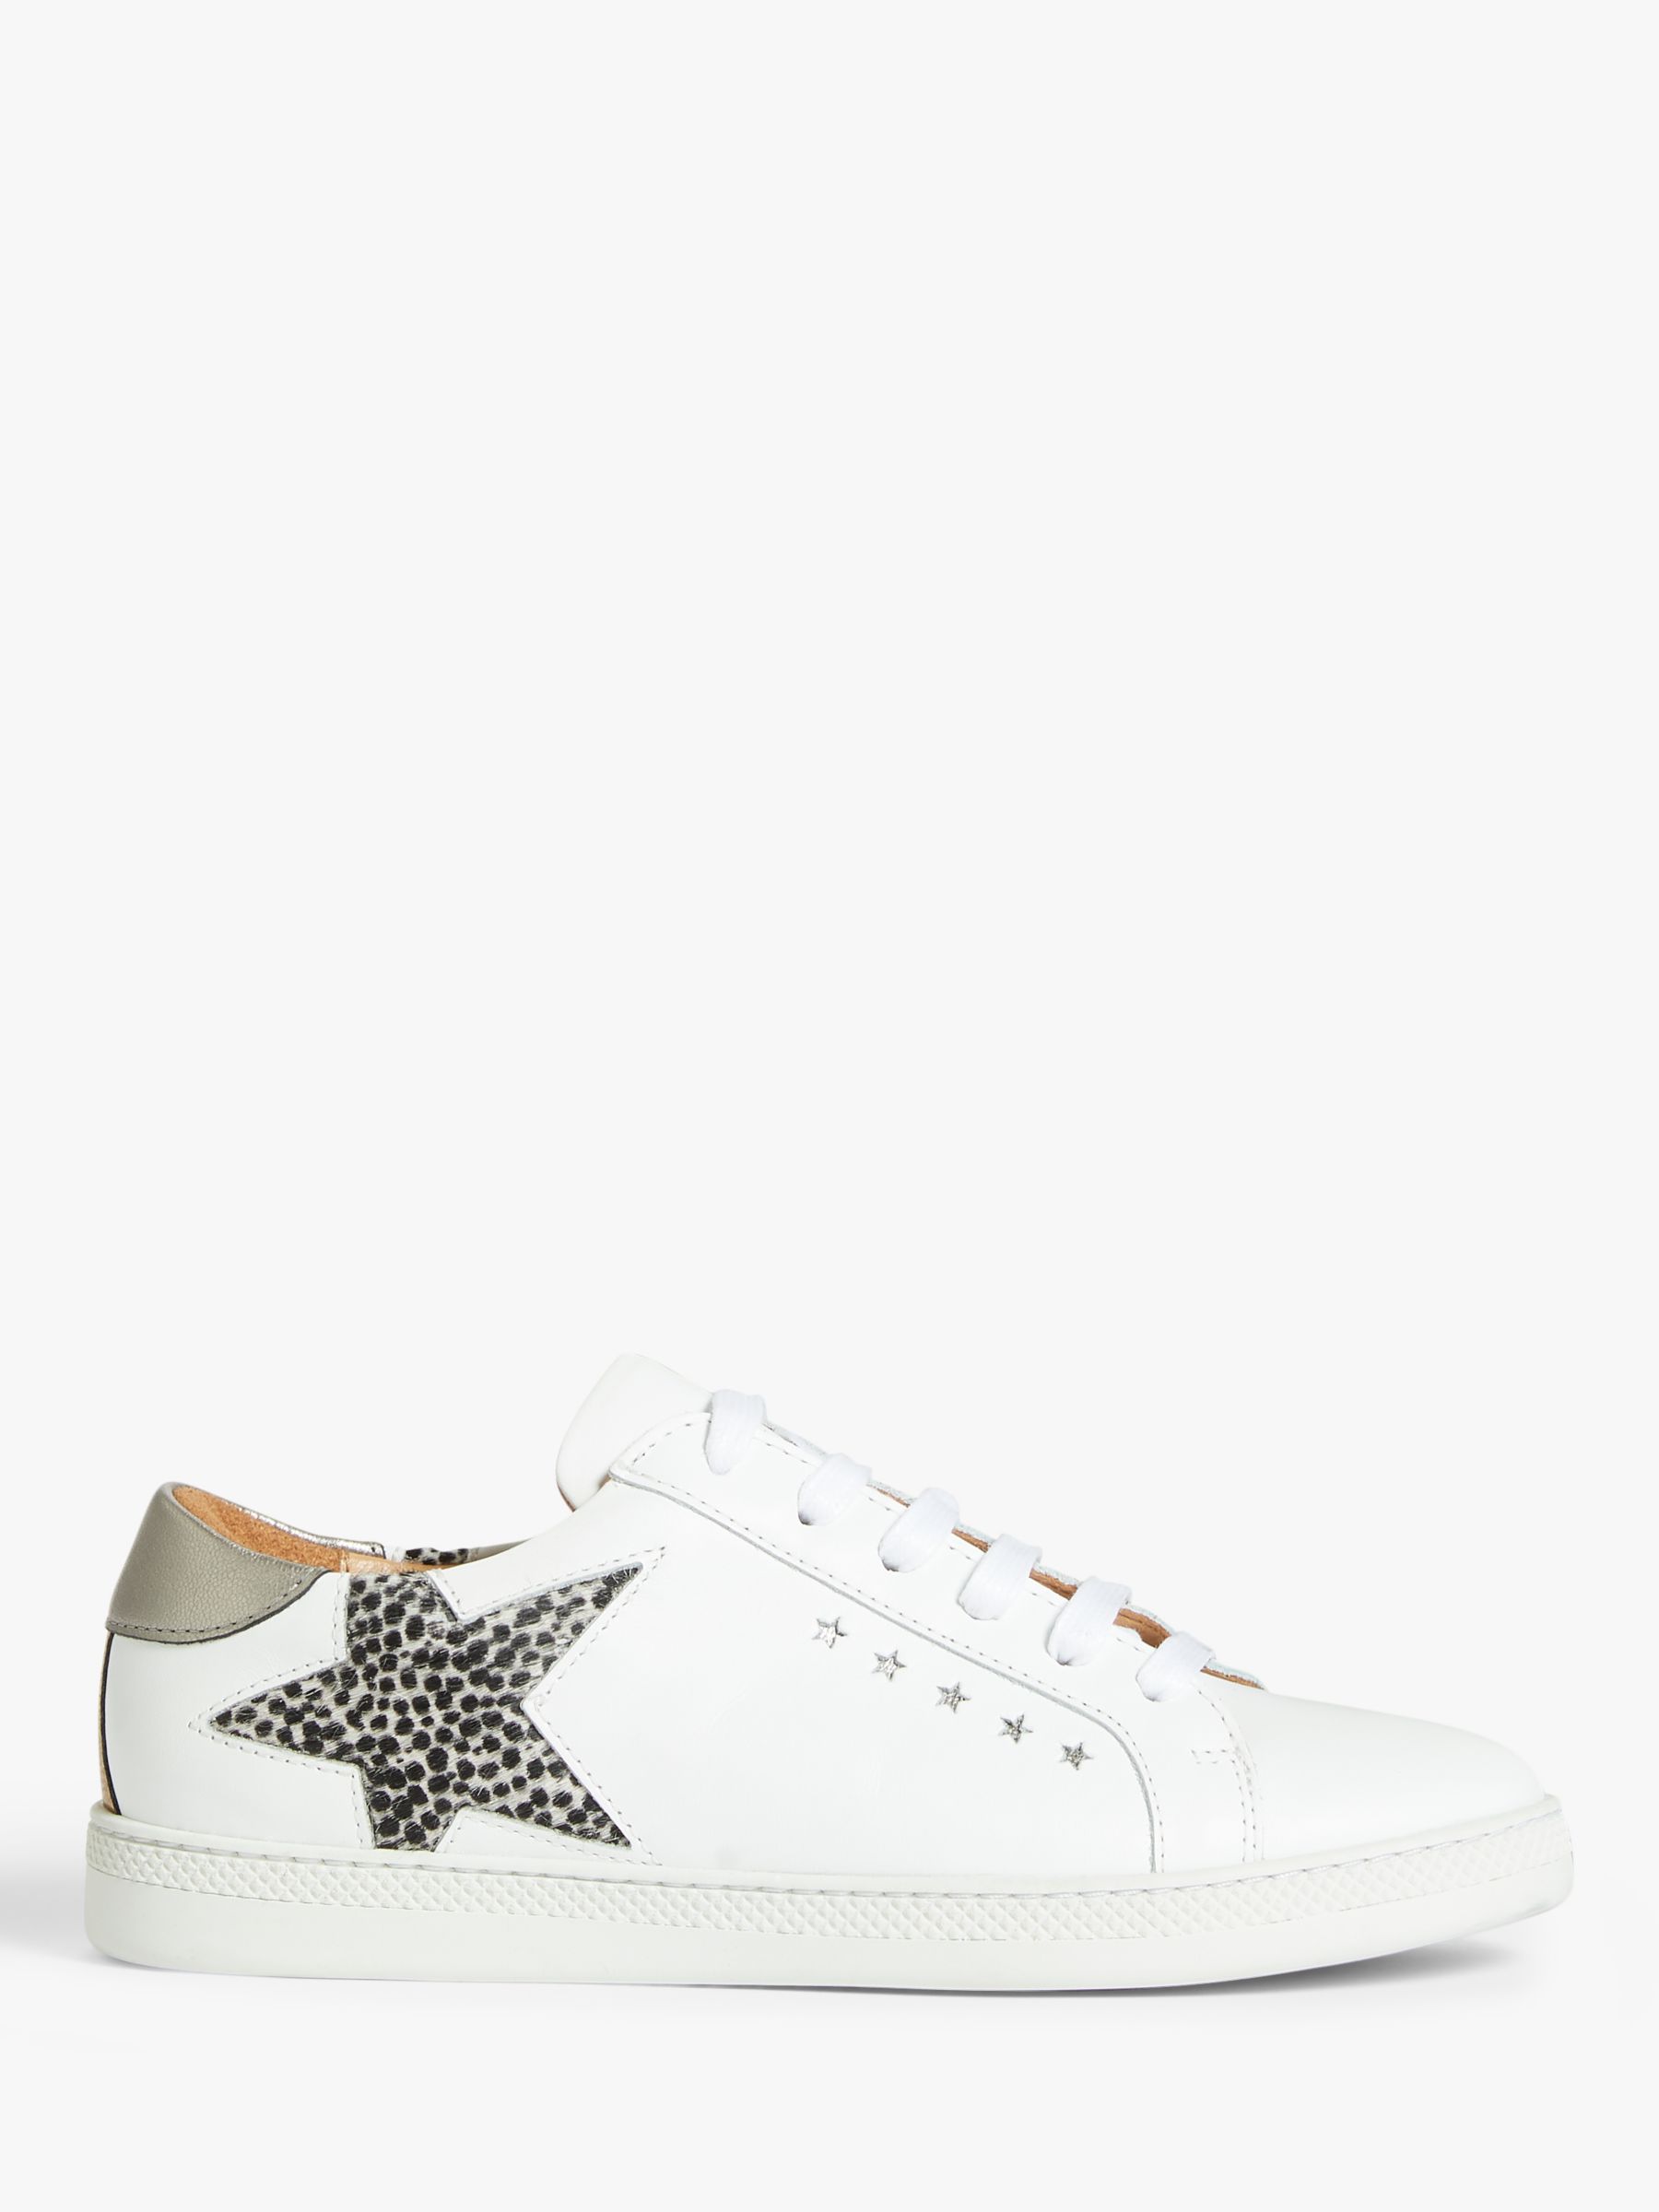 AND/OR Elana Leather Star Trainers, White/Leopard